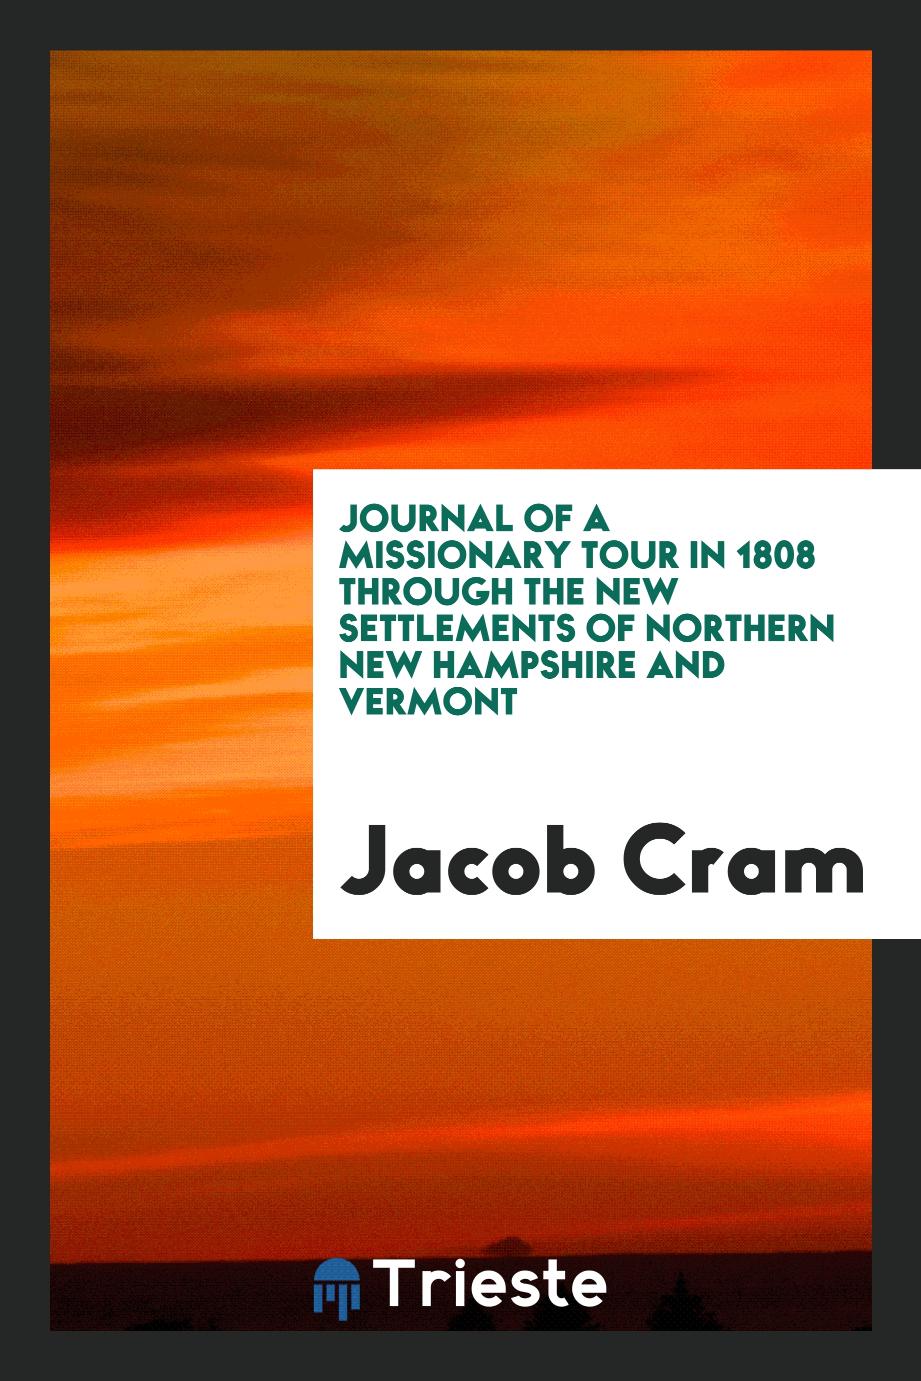 Journal of a missionary tour in 1808 through the new settlements of northern New Hampshire and Vermont